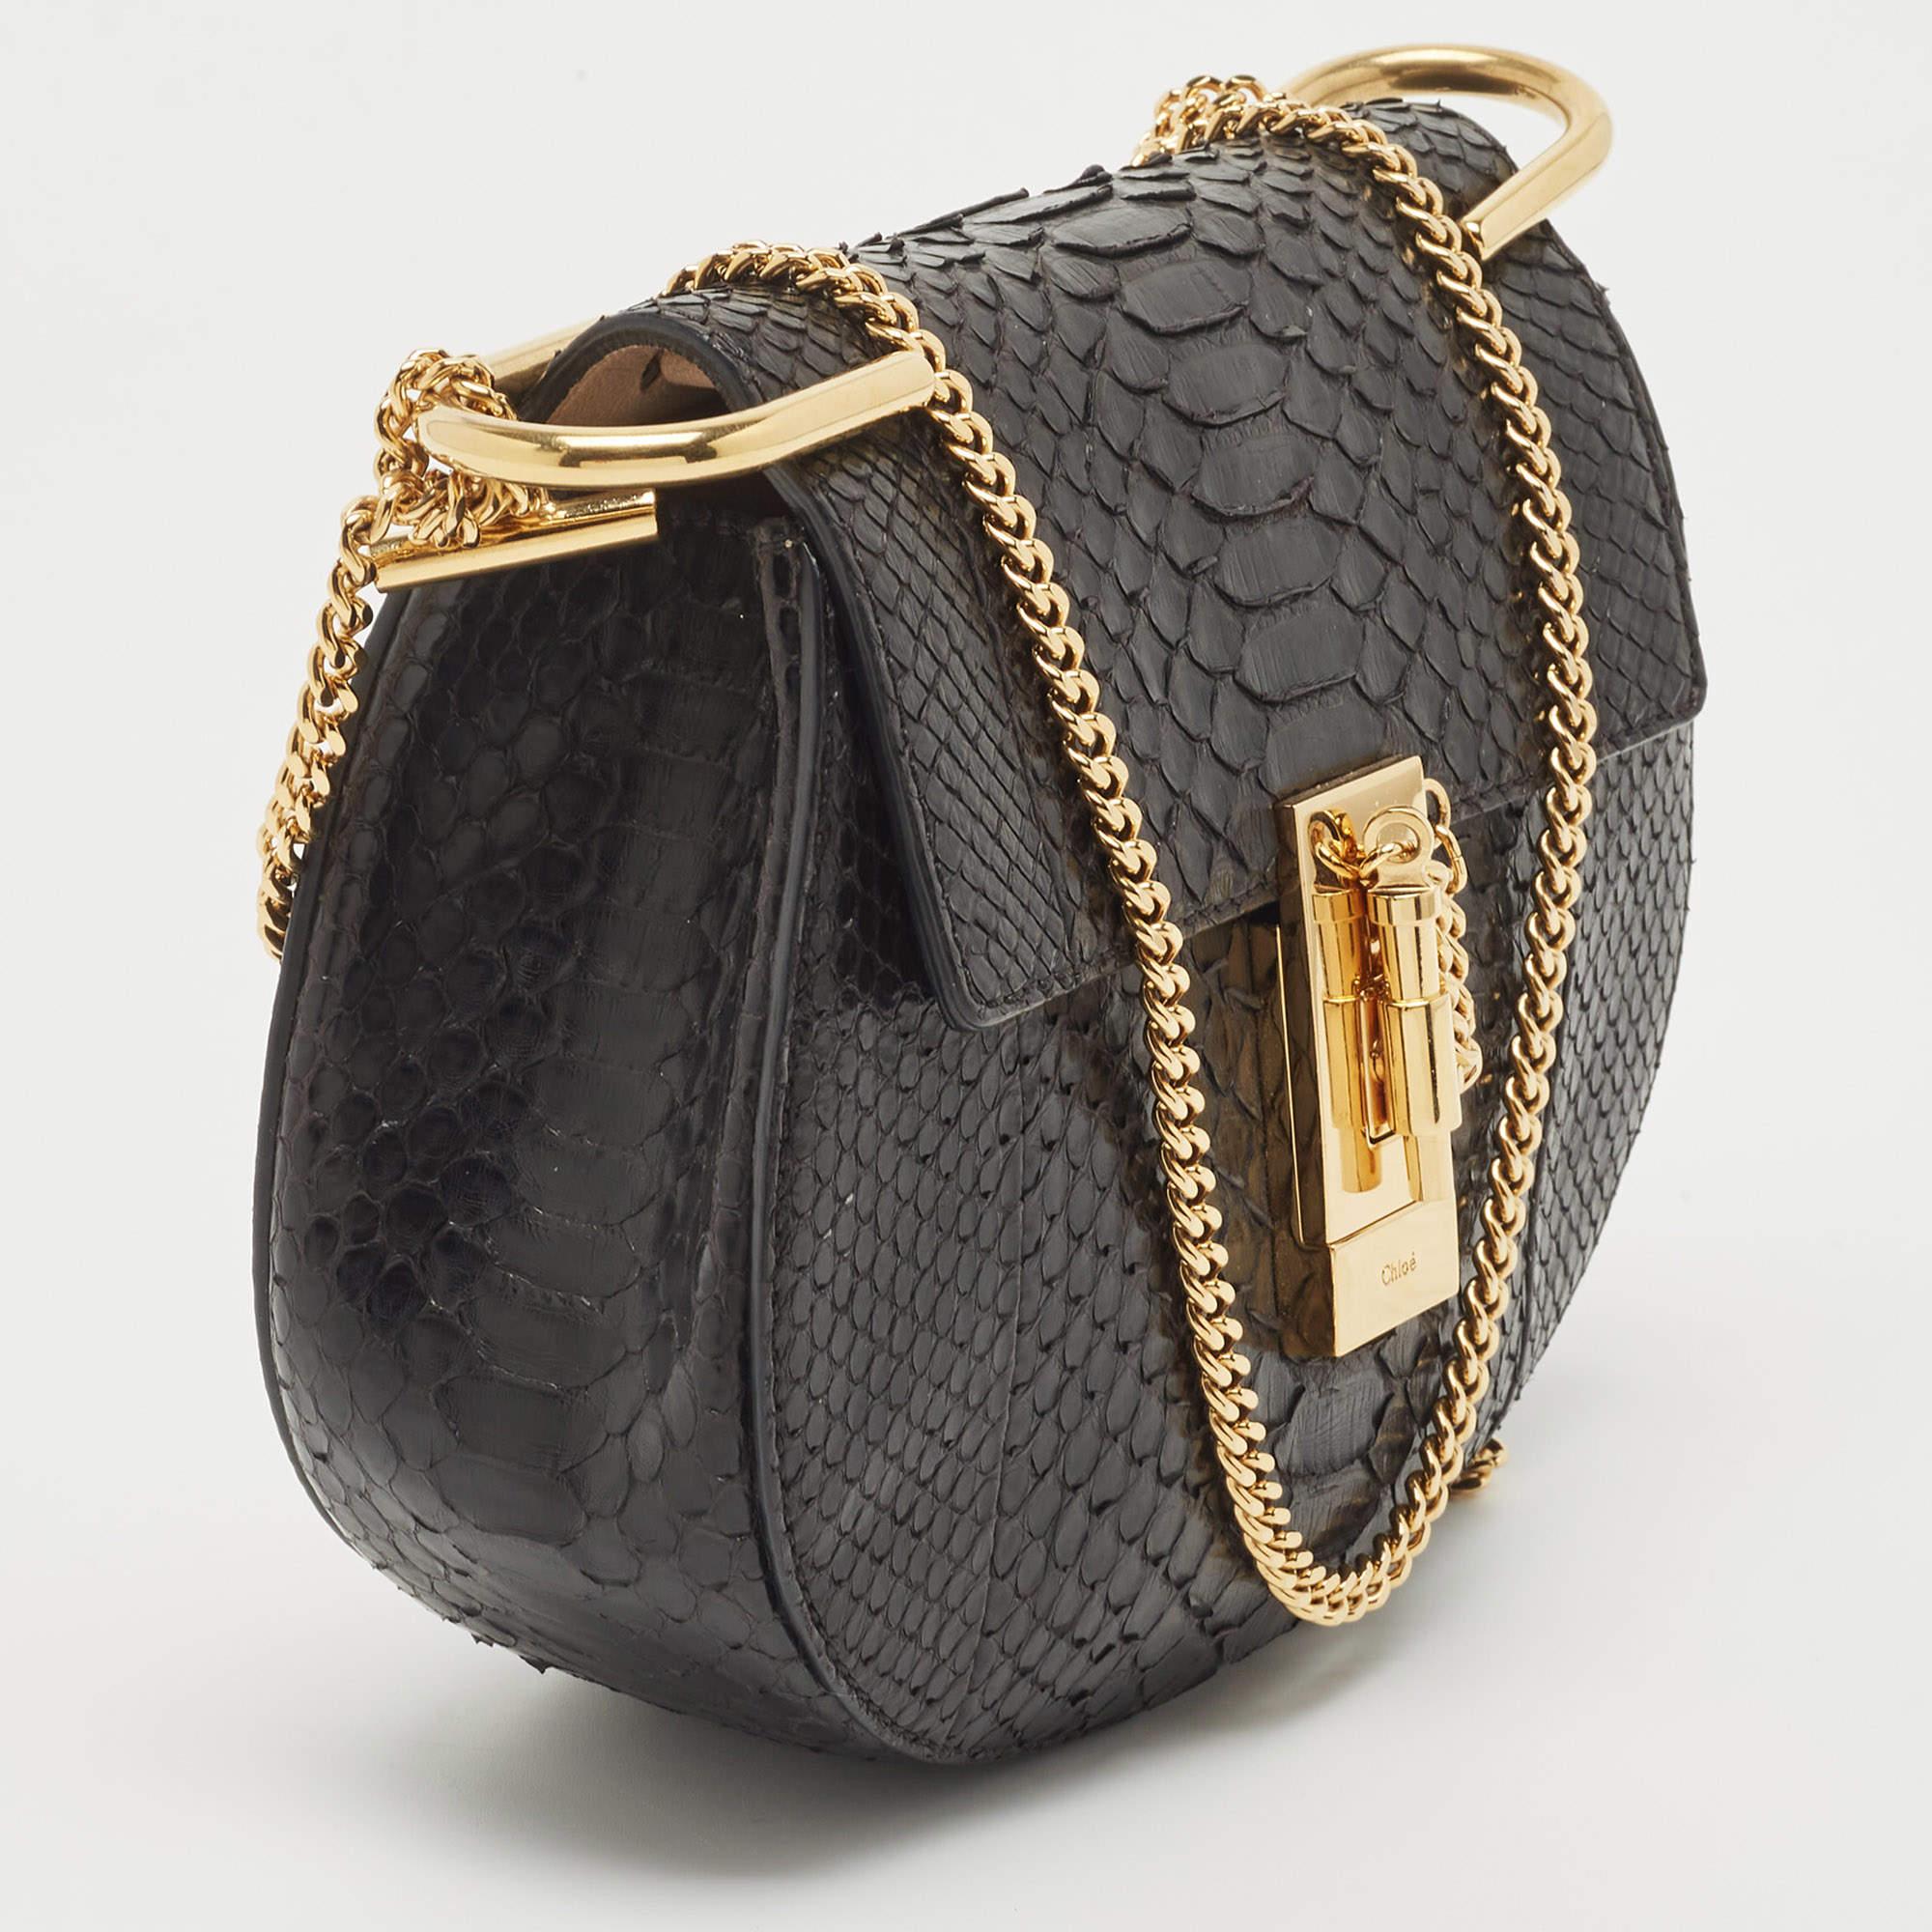 One of the most recognizable bags in the luxury world, Chloe's Drew bag is known for its distinct shape and minimal style detailing. This shoulder bag has been meticulously crafted from exotic skin and designed with a pin lock closure and a shoulder